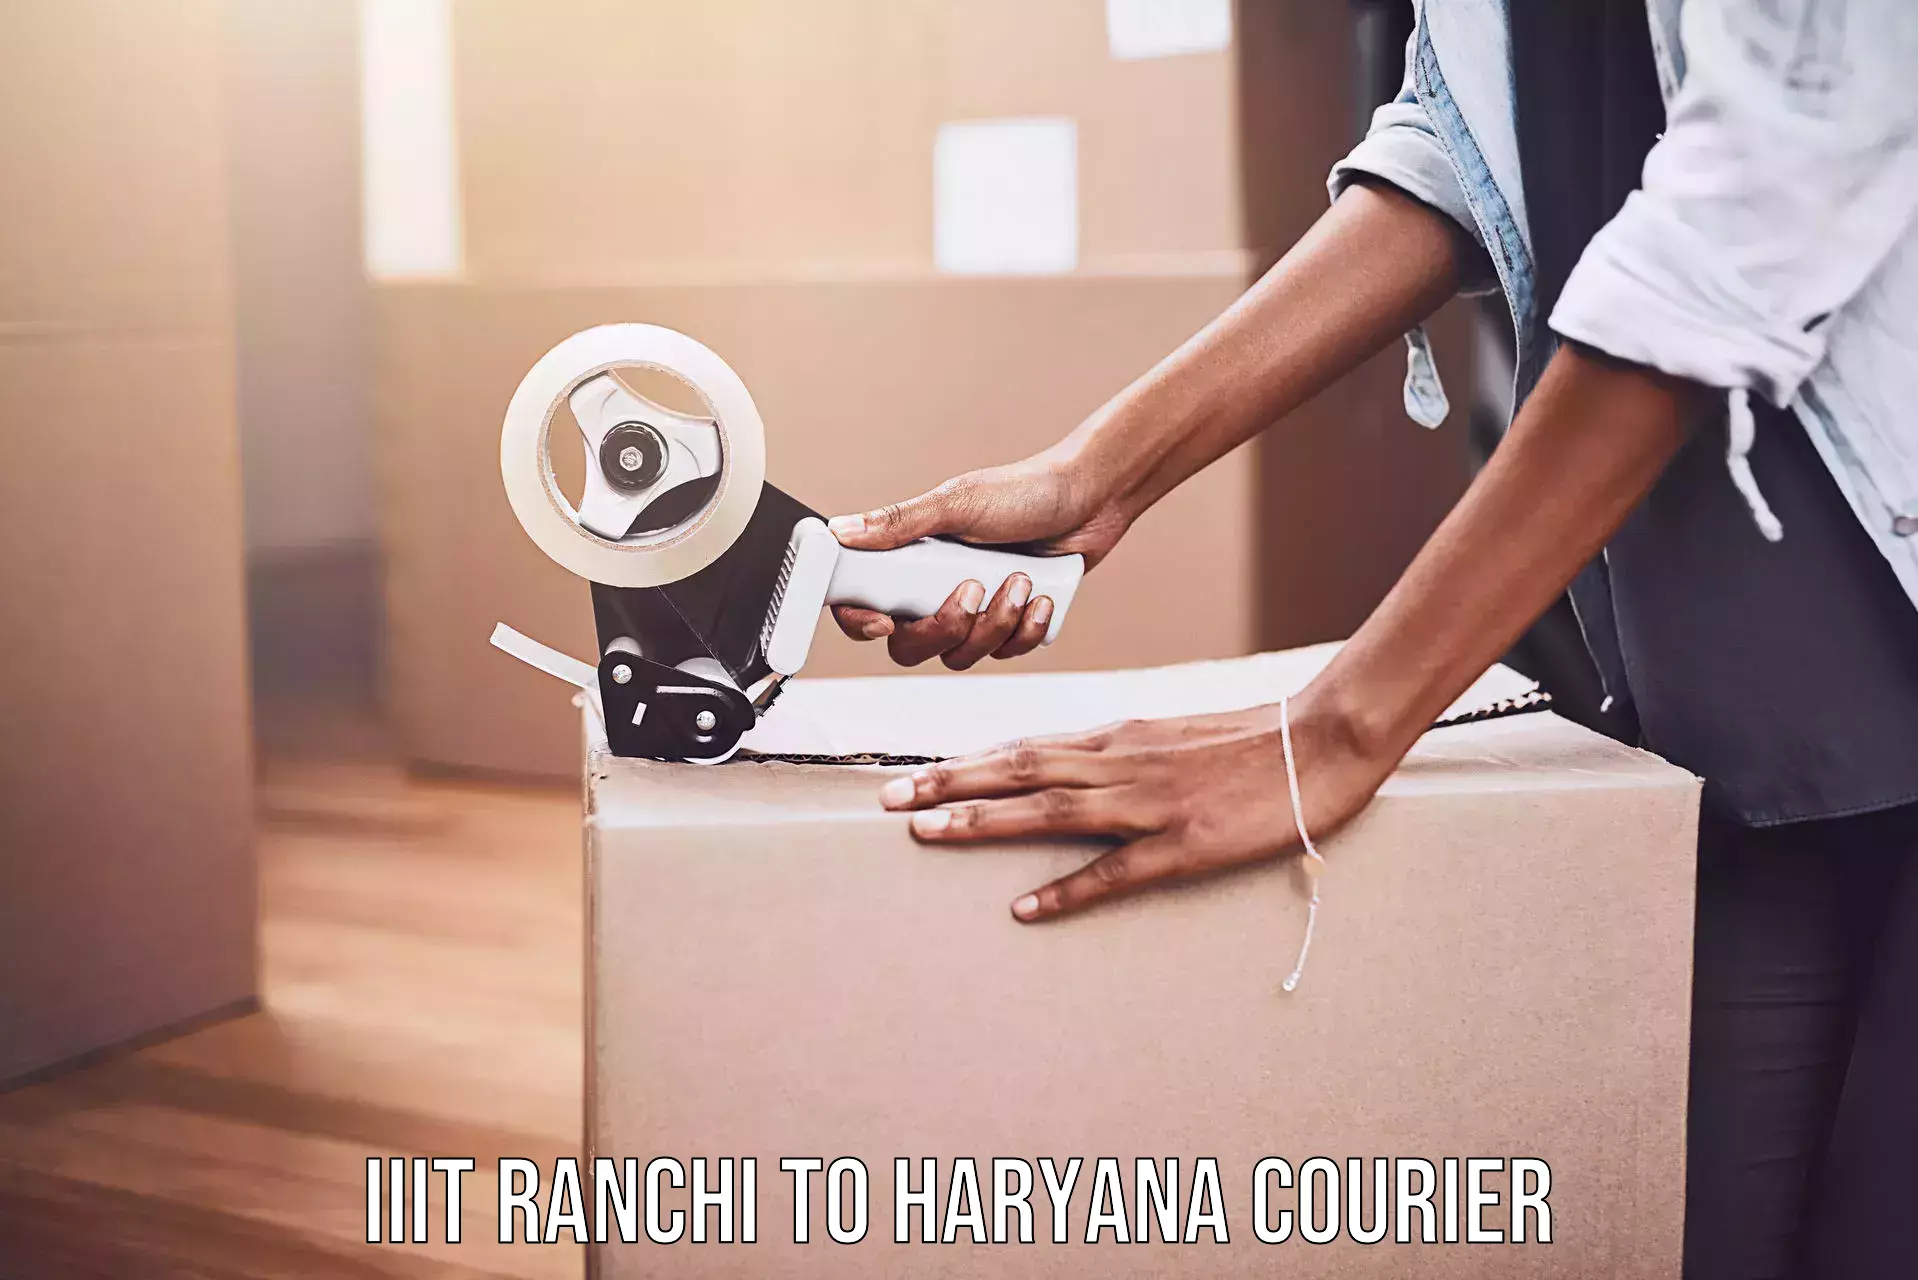 Local delivery service IIIT Ranchi to Bhiwani